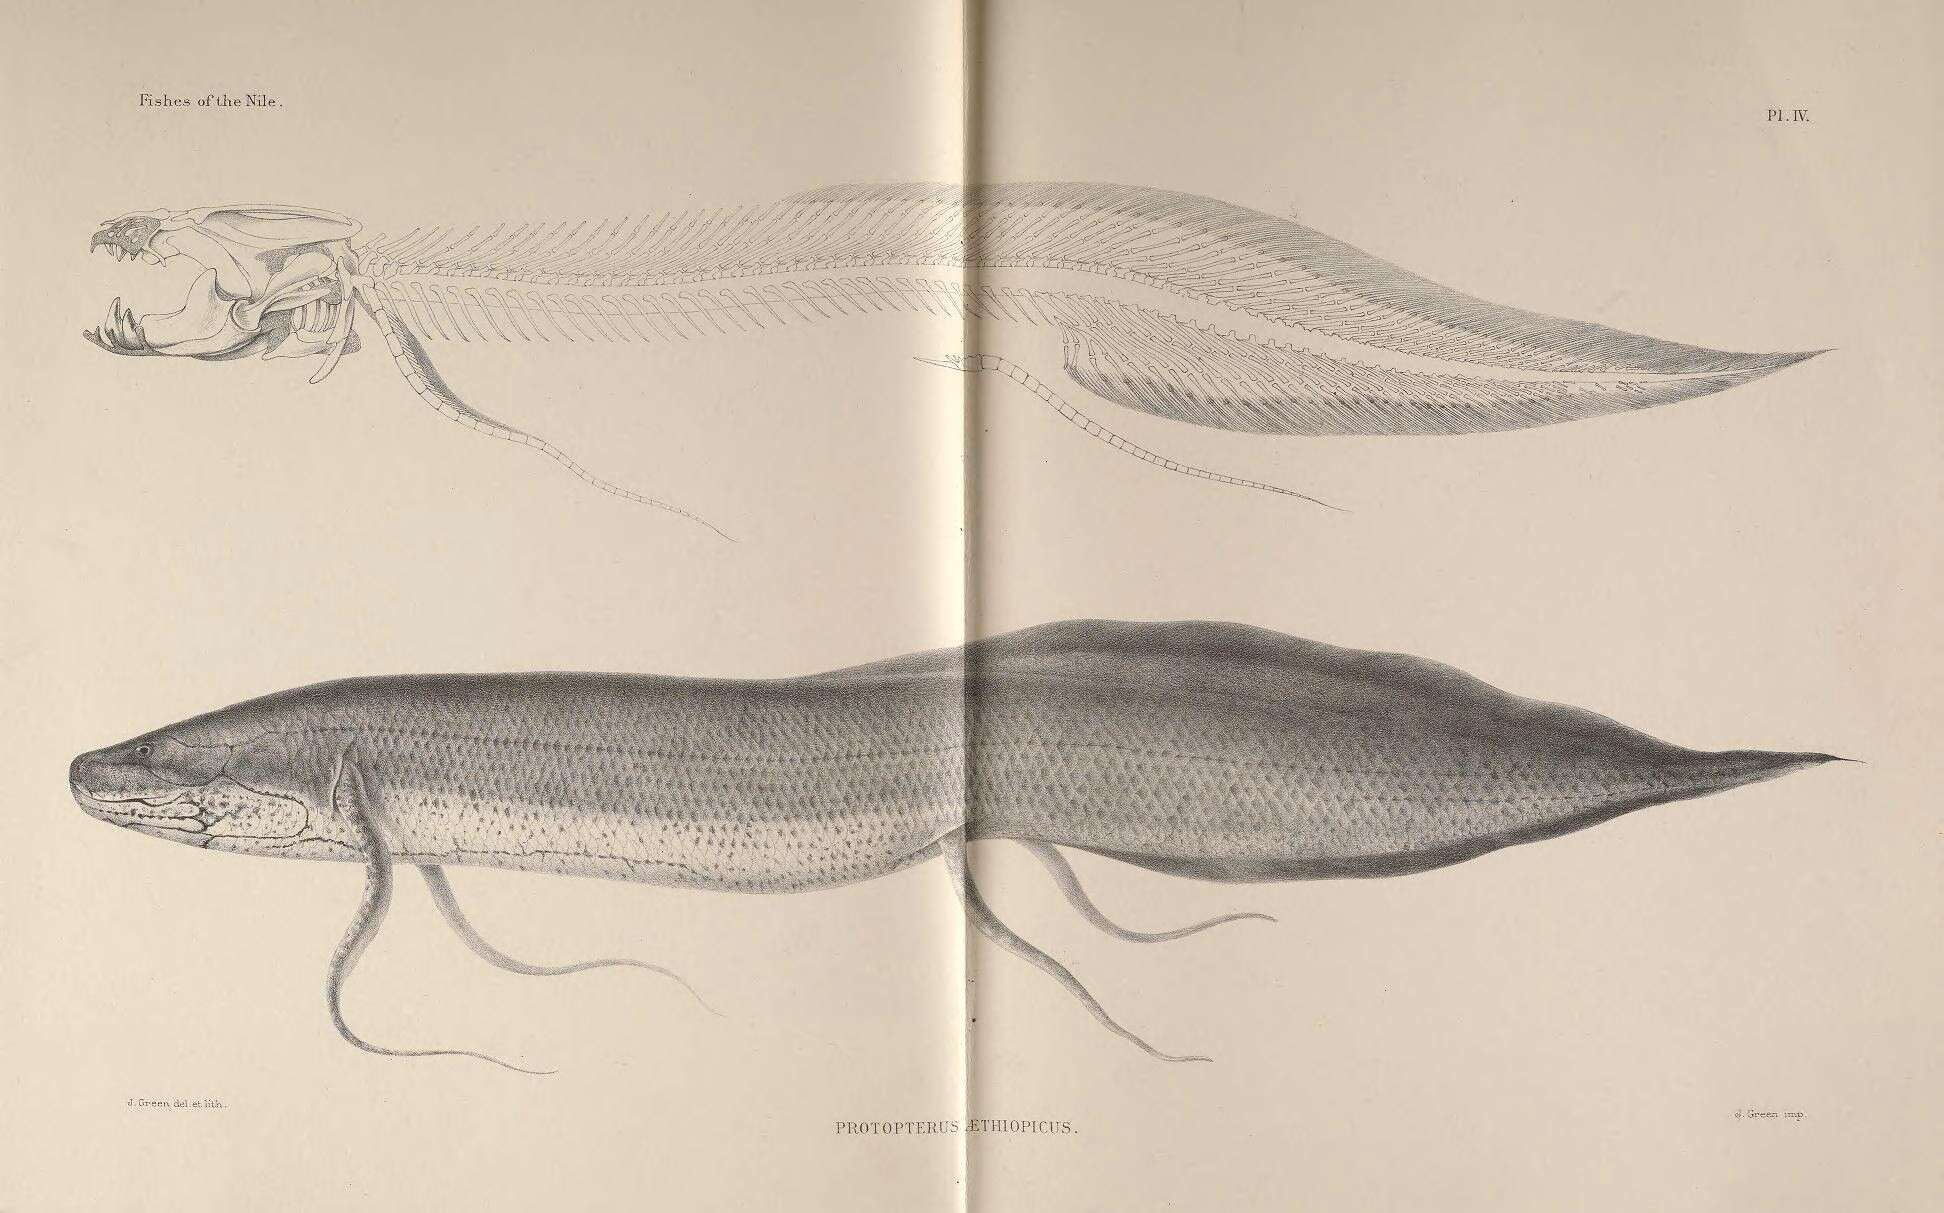 Image of lungfishes